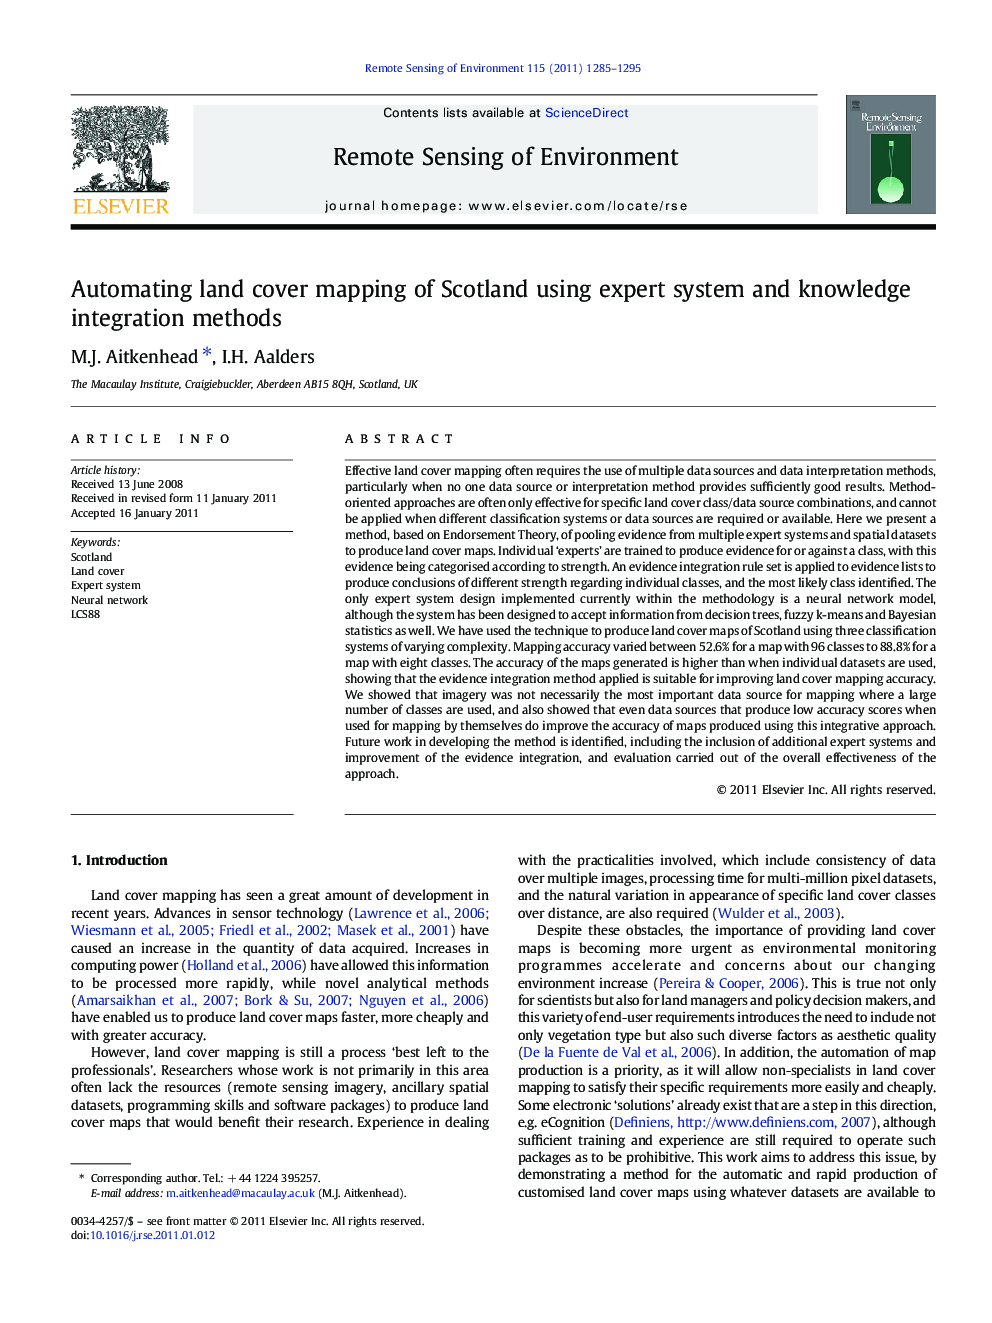 Automating land cover mapping of Scotland using expert system and knowledge integration methods